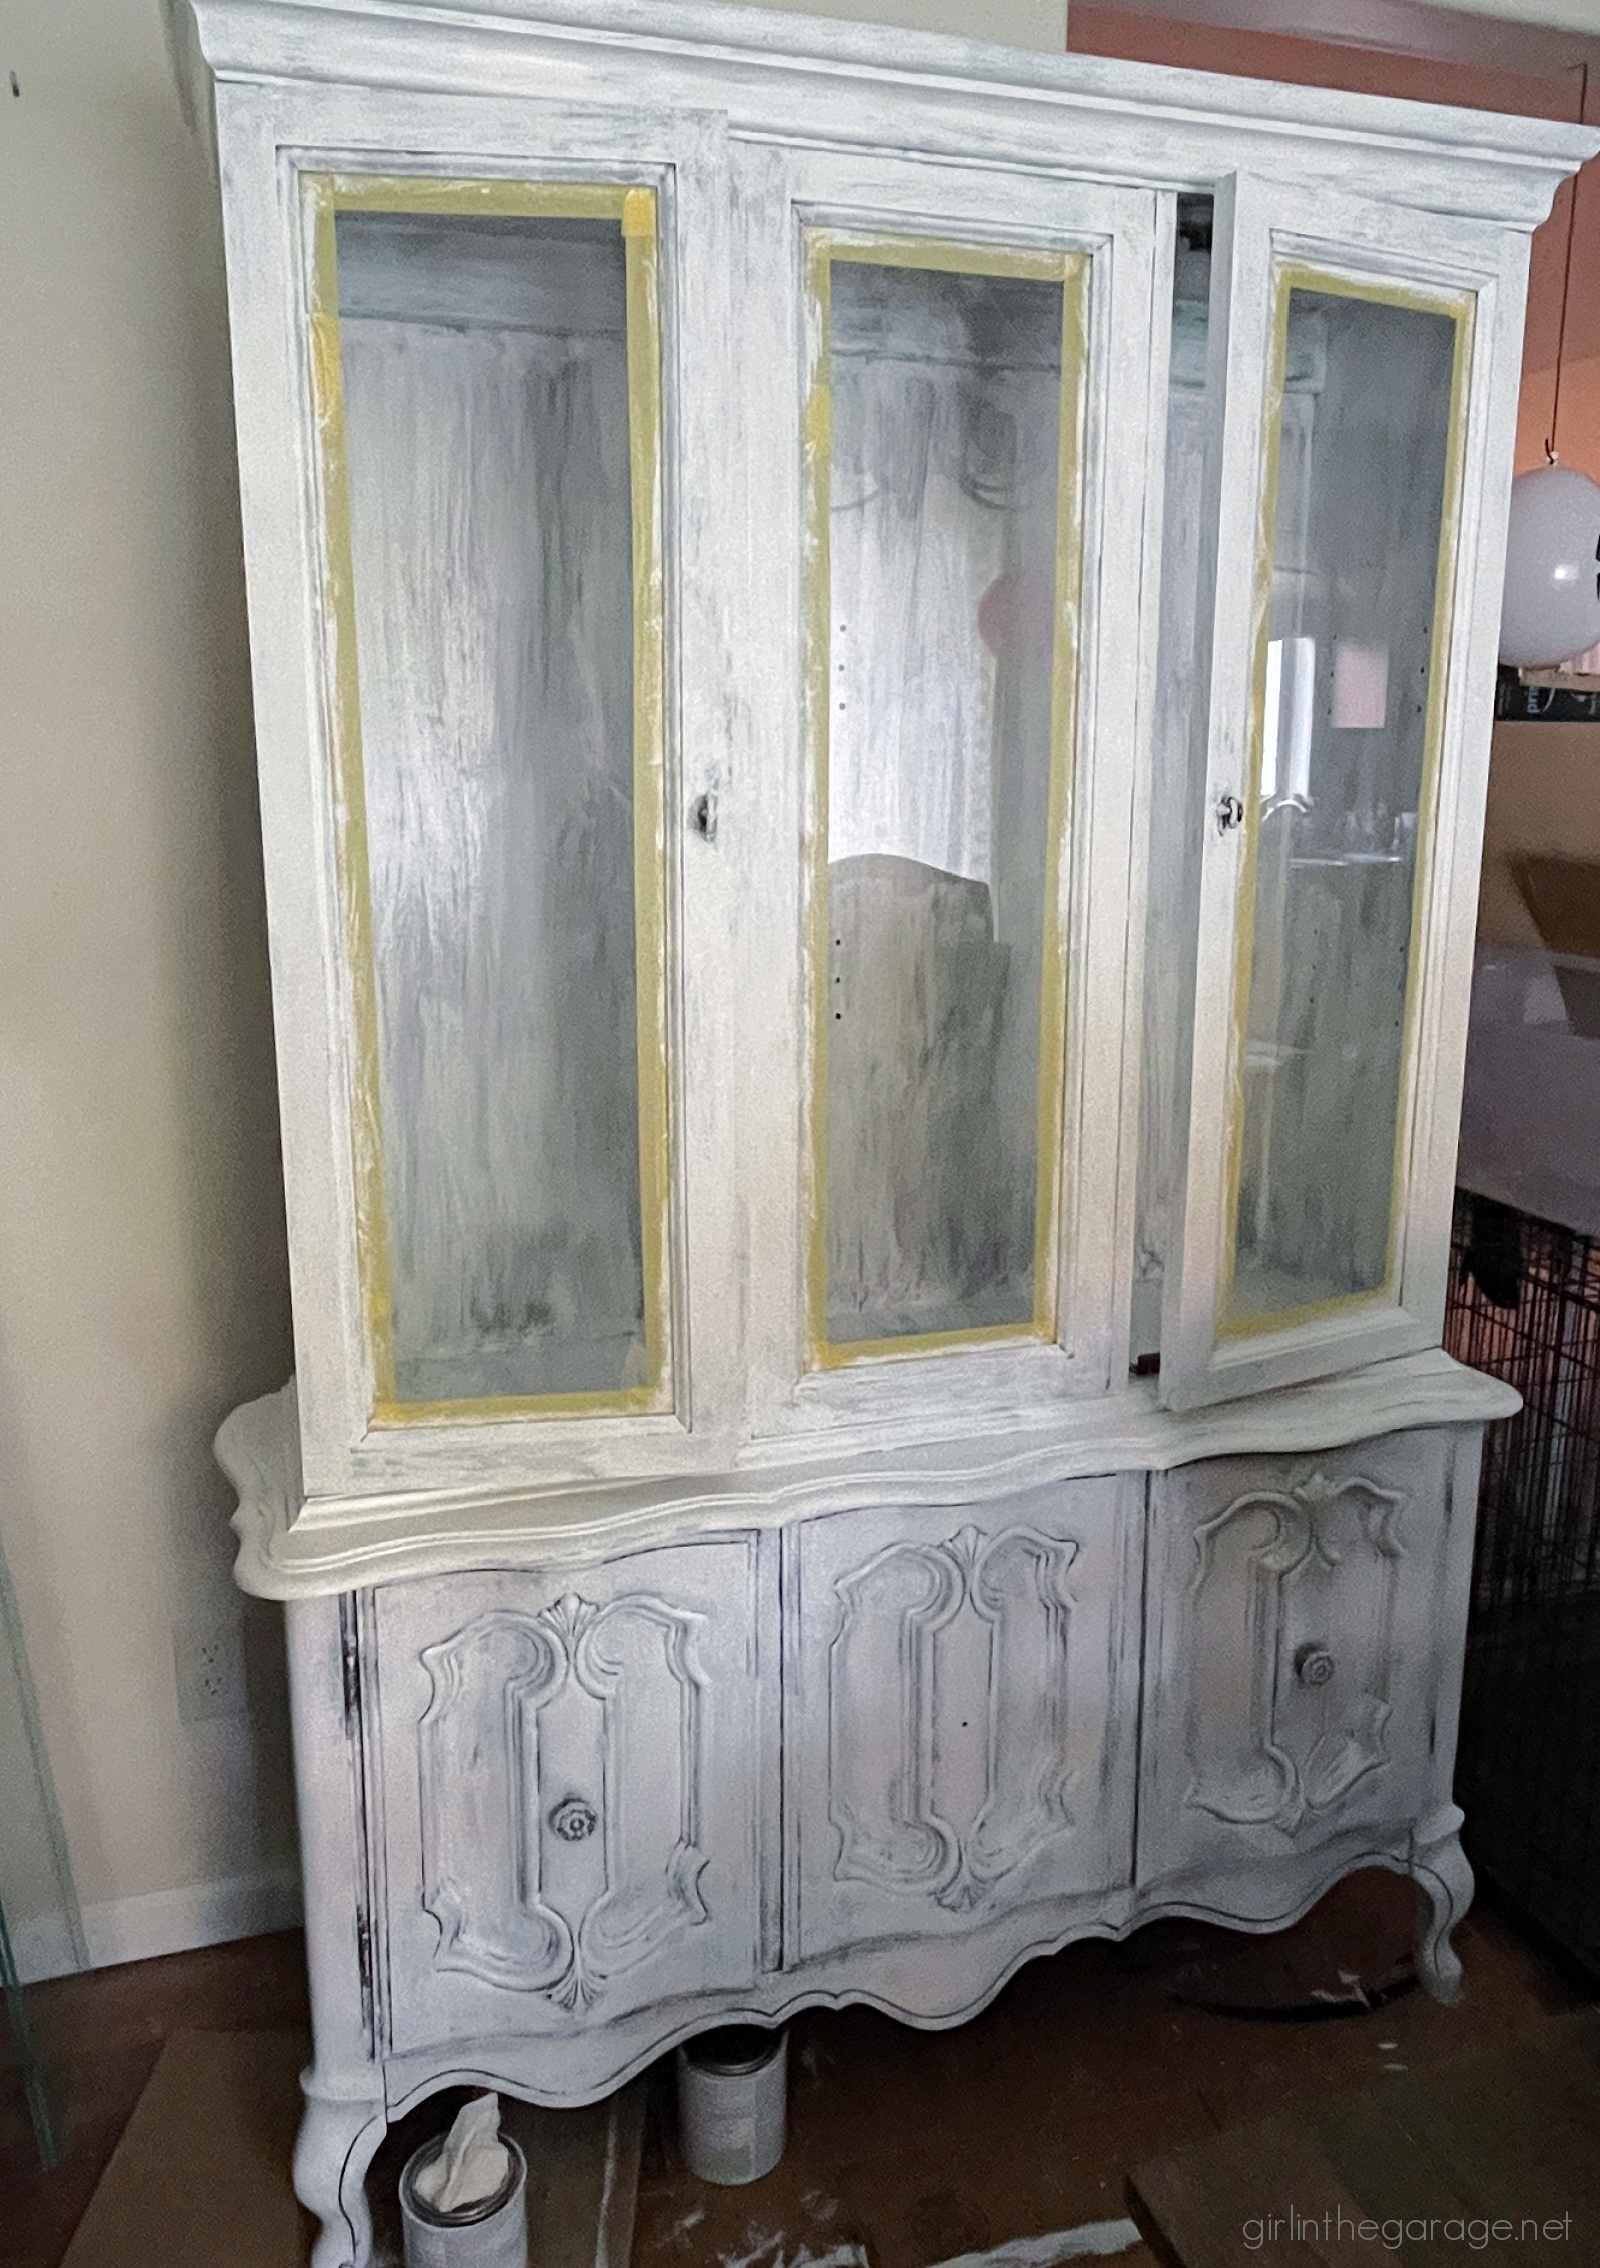 How to create a gorgeous painted china cabinet with wallpapered back. Full tutorial with photos by Girl in the Garage.